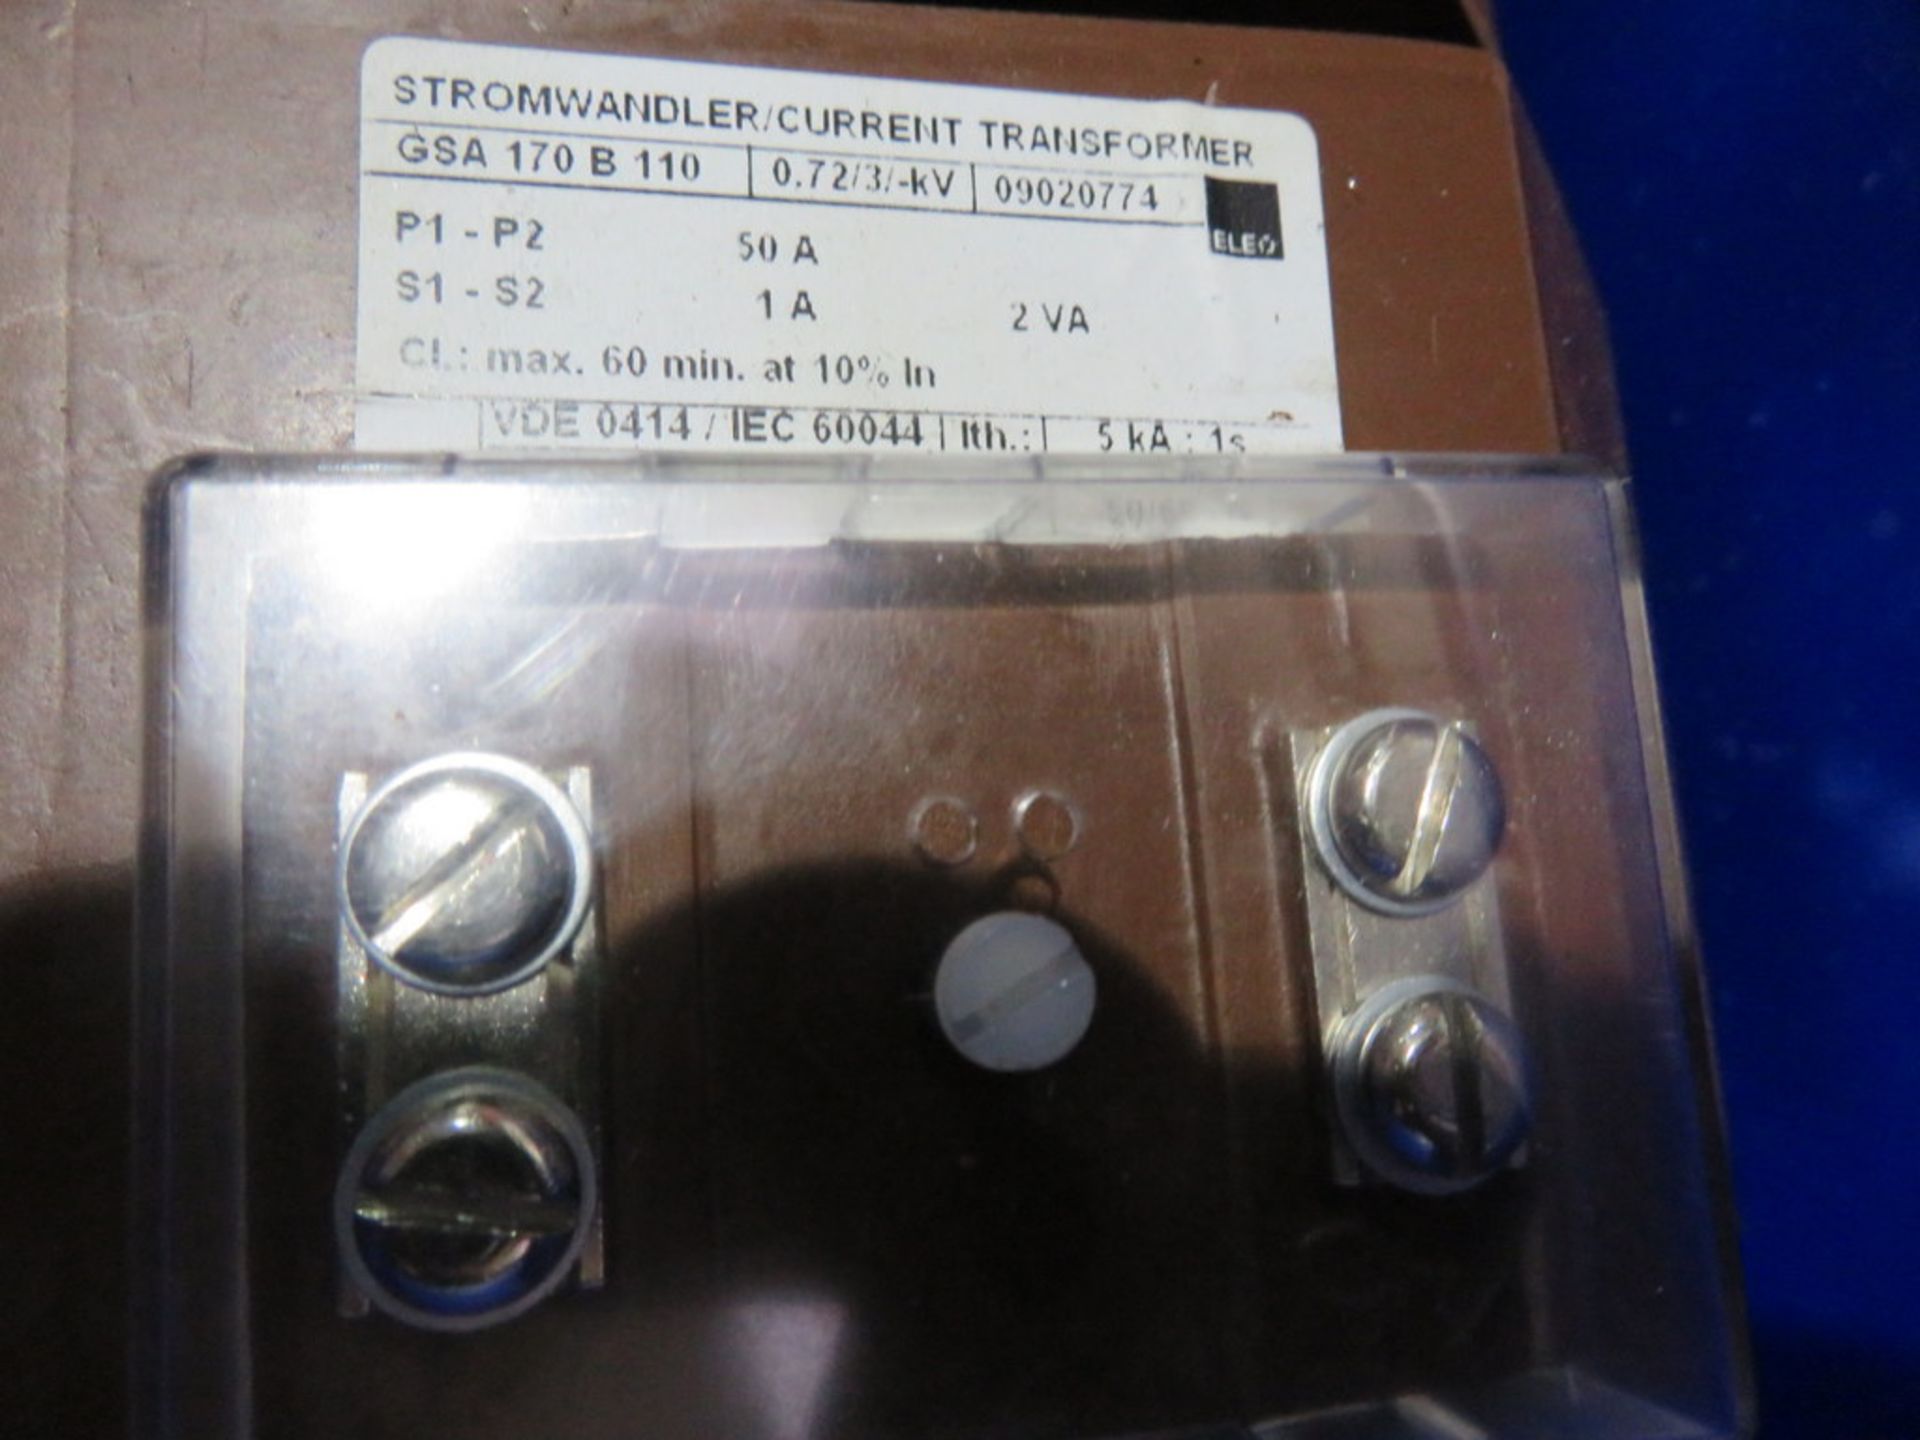 10 X STROMWANDLER CURRENT TRANSFORMERS - Image 3 of 3